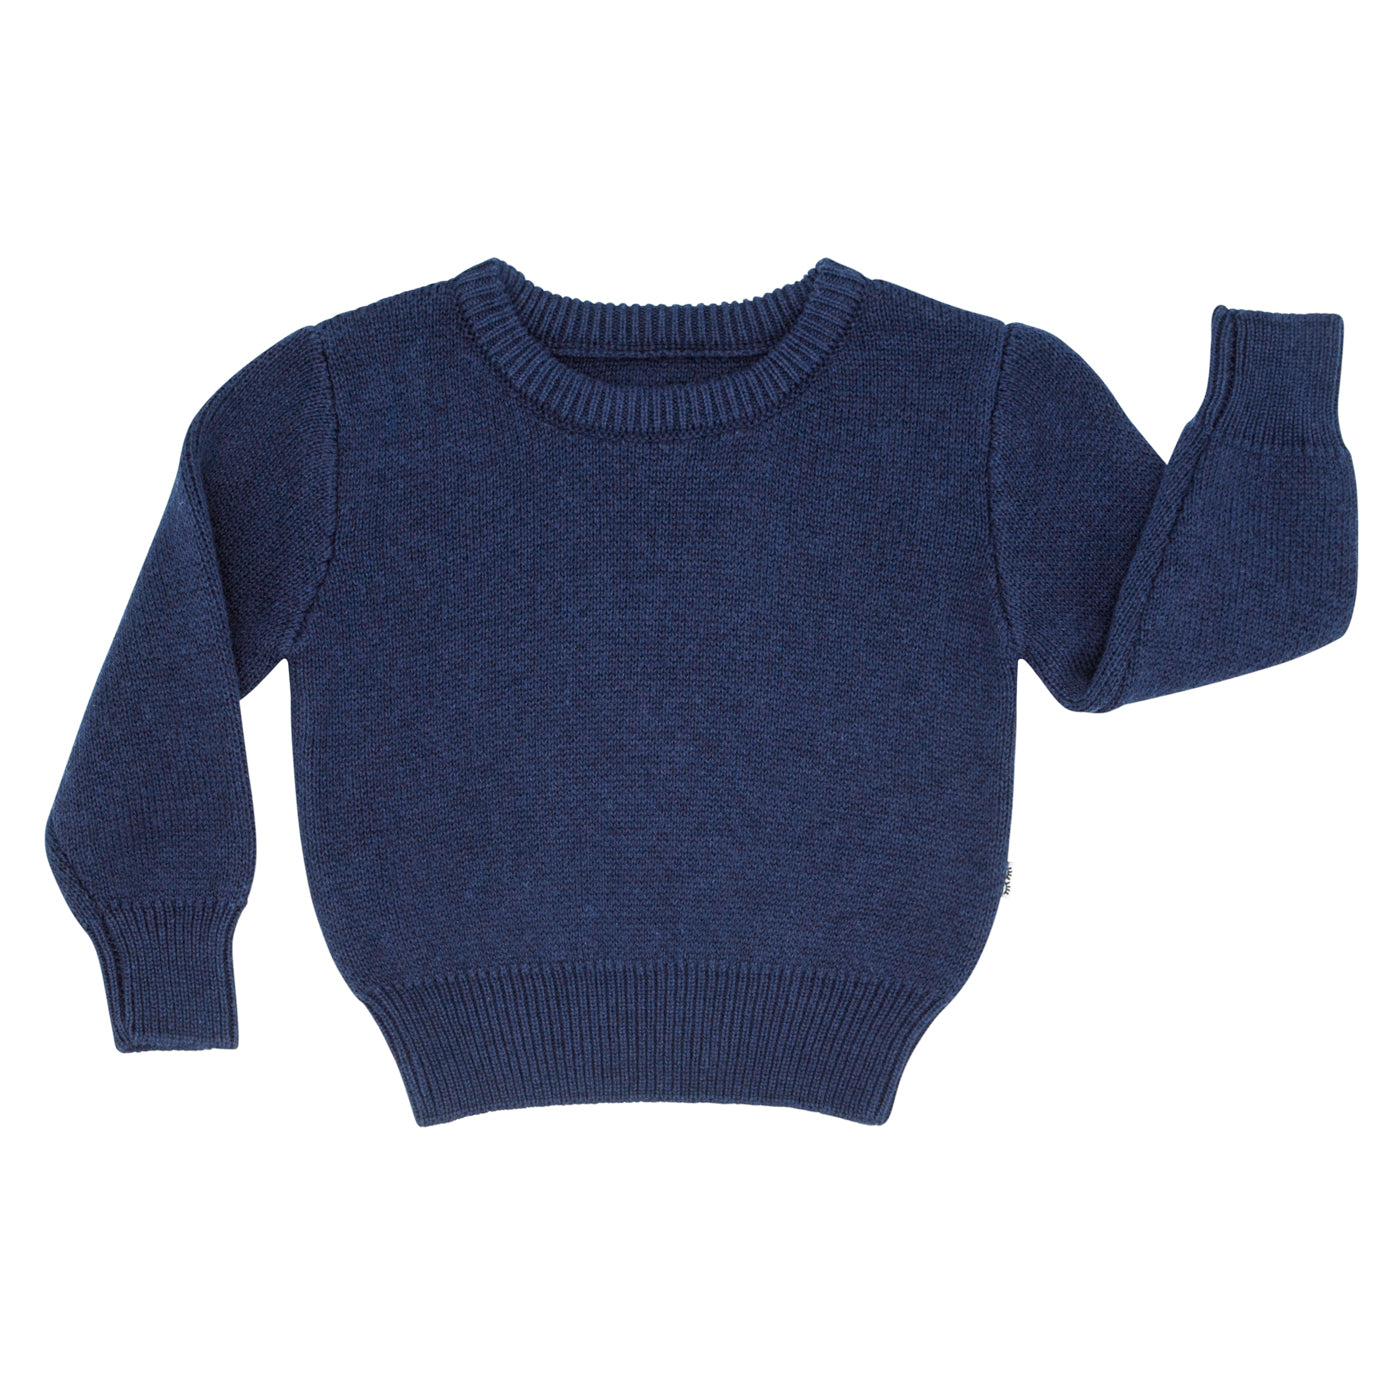 Flat lay image of a Classic Navy knit sweater